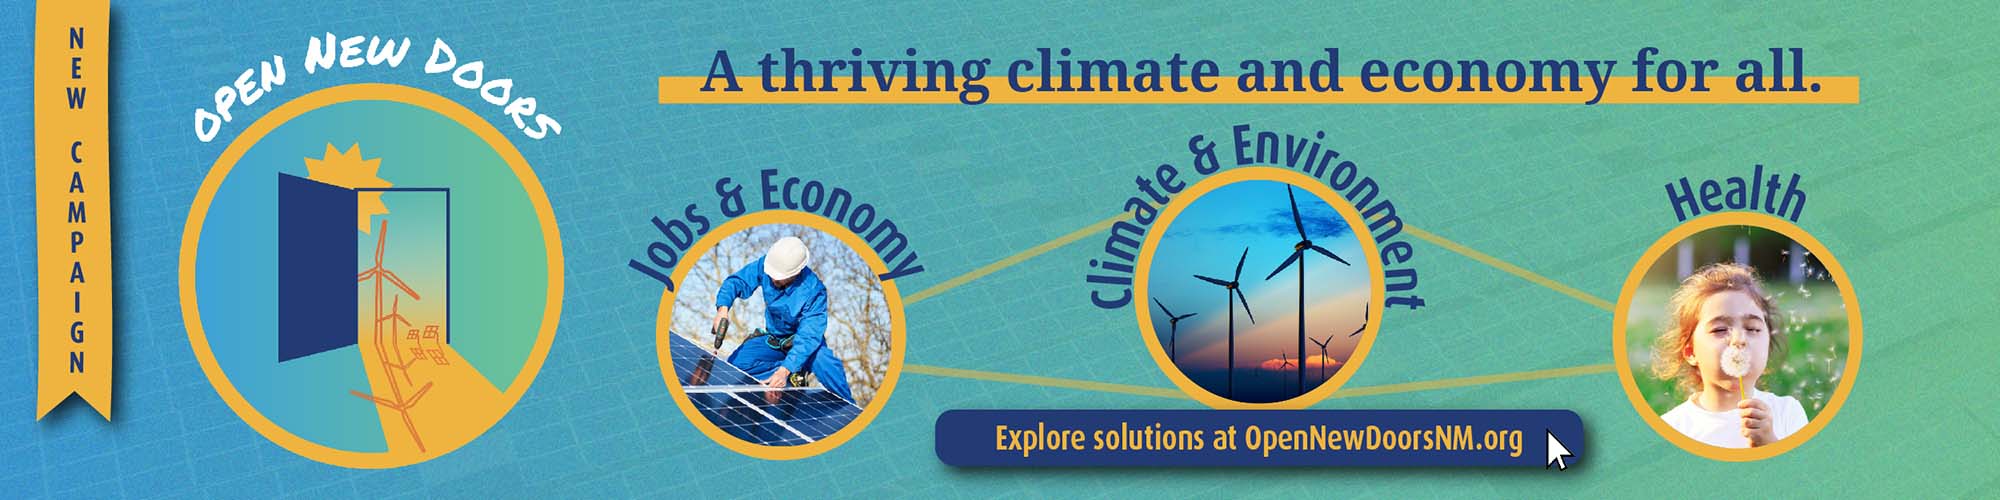 Banner ad with the Open New Doors logo and a headline "A thriving climate and economy for all"